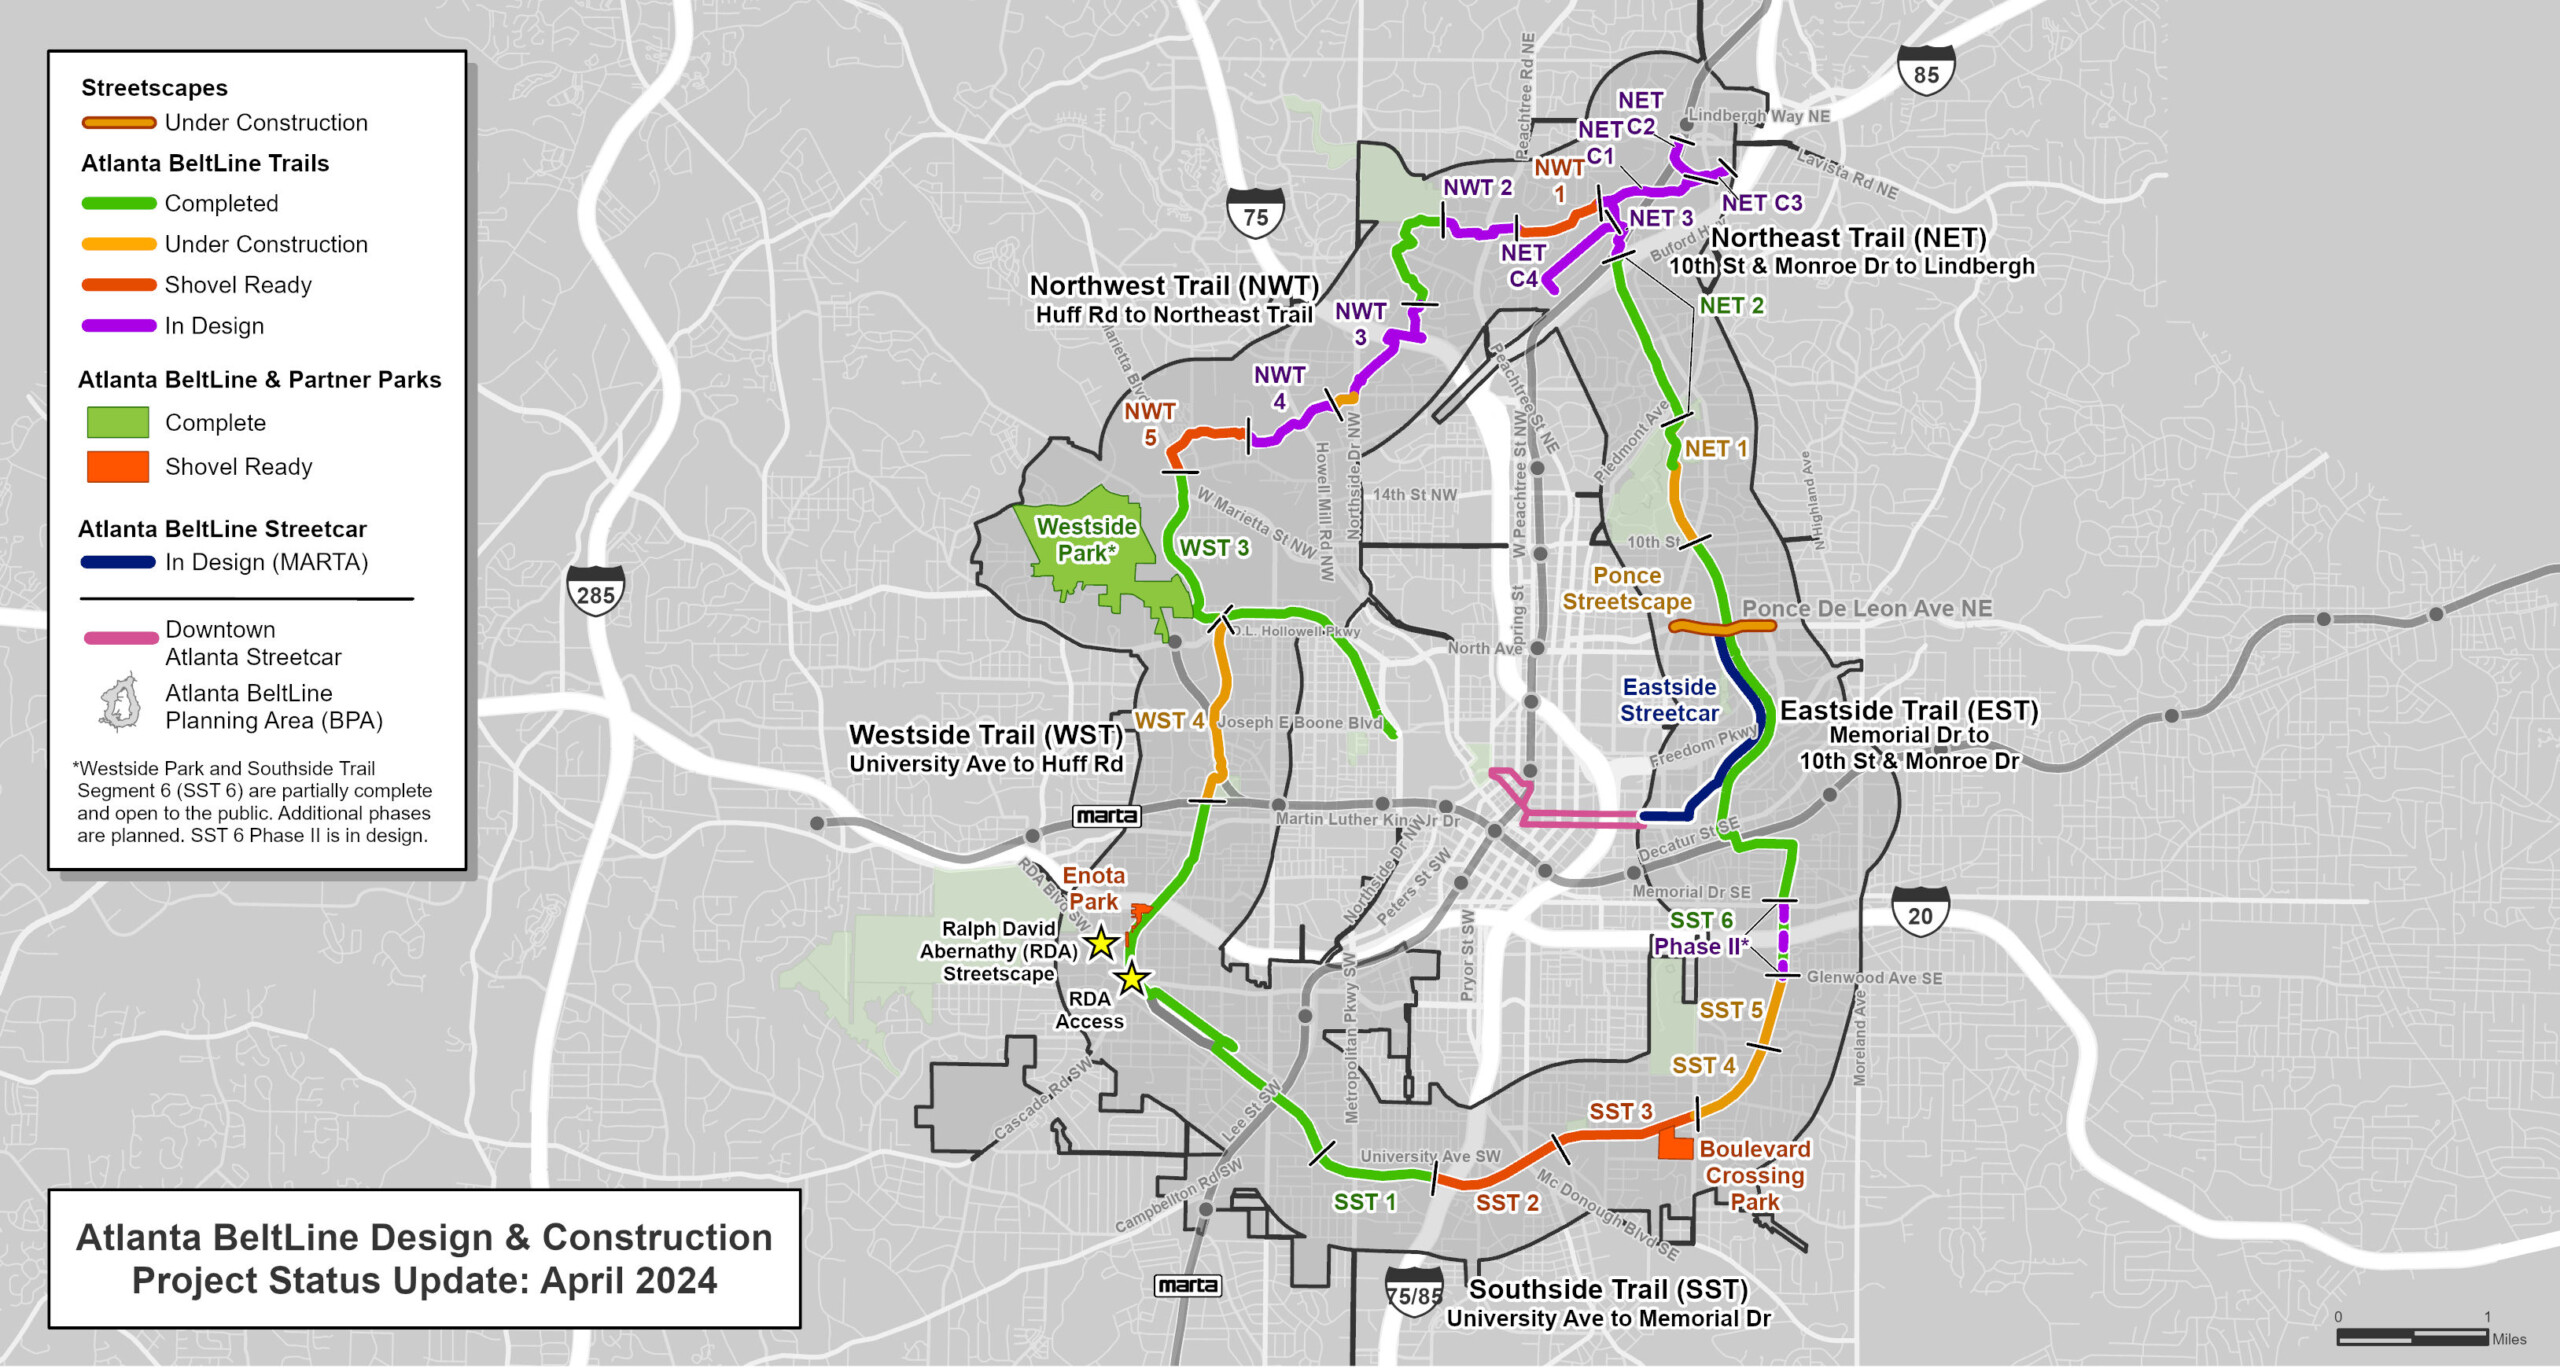 Atlanta BeltLine's design and construction project status as of April 2024